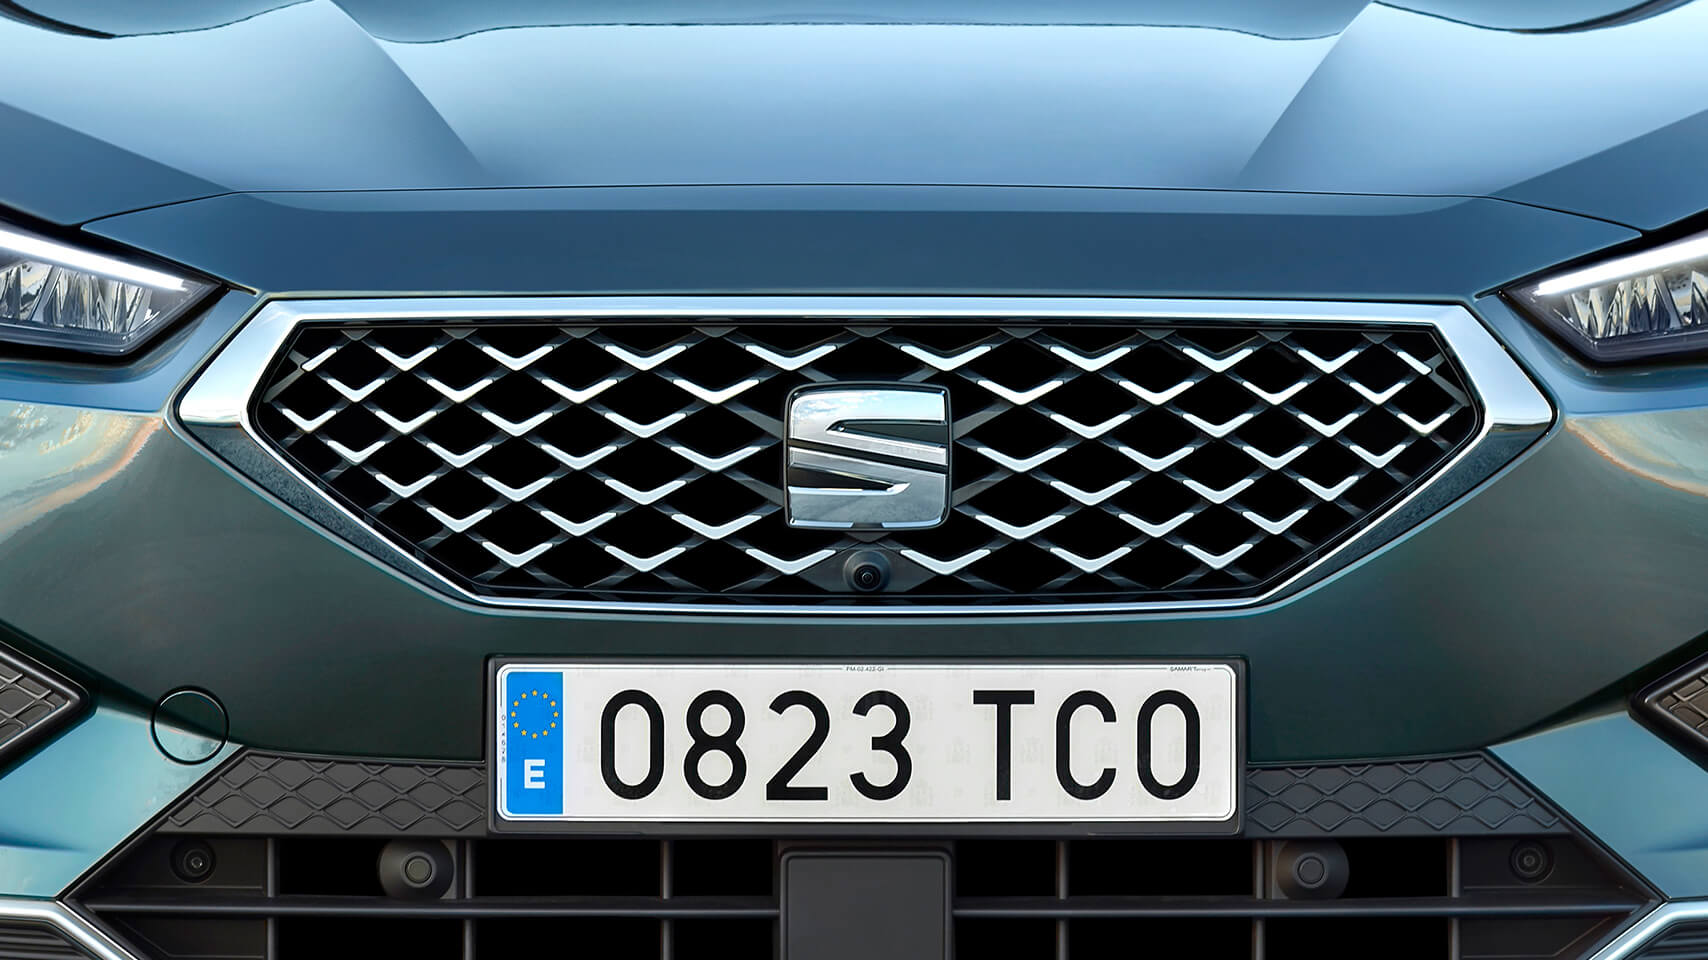 SEATʼs new flagship model the new SEAT Tarraco SUV front grille